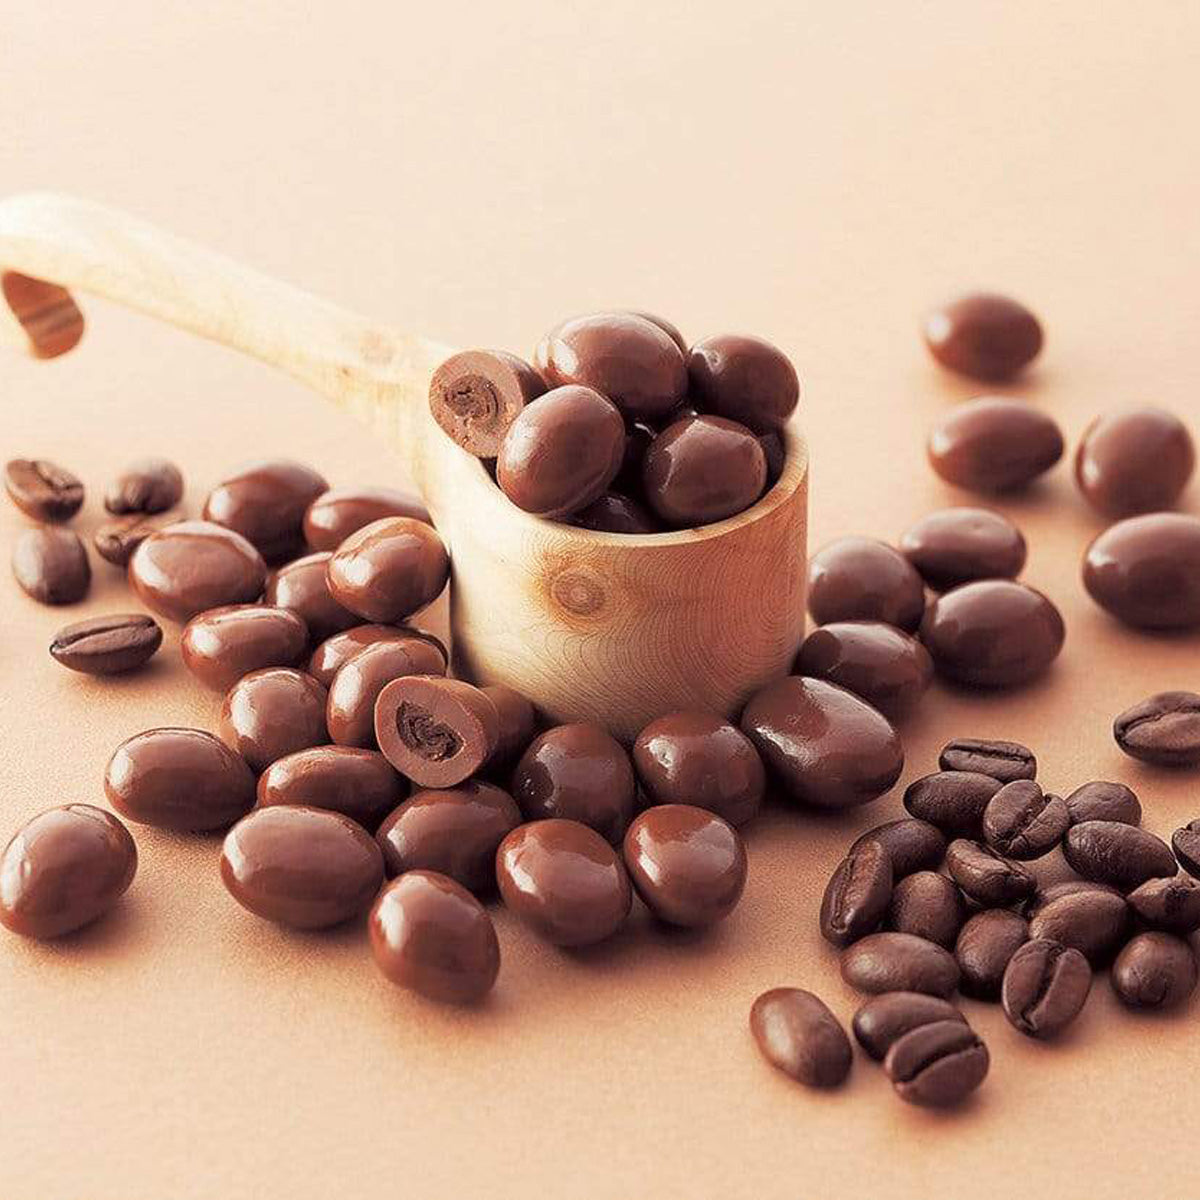 ROYCE' Chocolate - Coffee Beans Chocolate - Image shows brown chocolate-coated coffee beans. Accents include a wooden scoop and a light brown background.